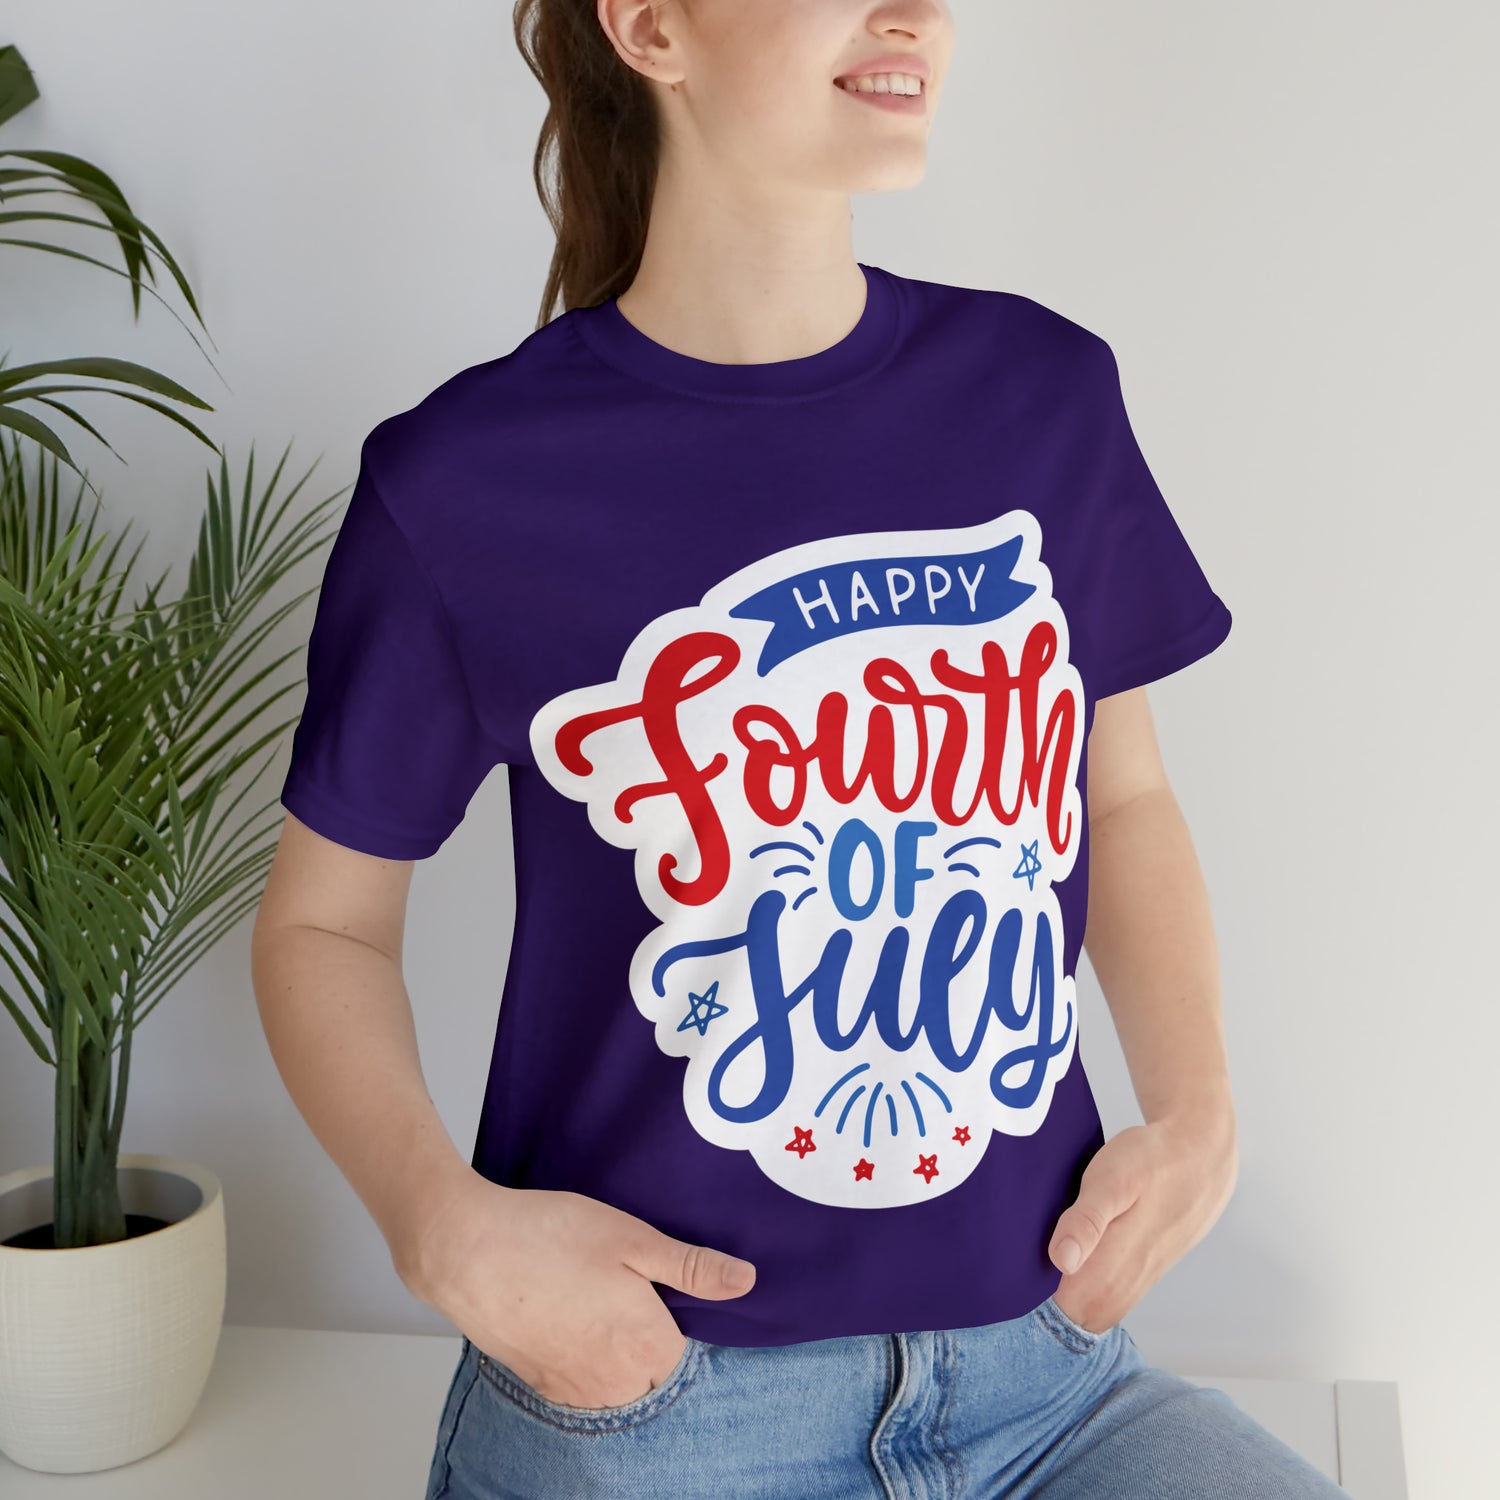 Team Purple T-Shirt Tshirt Design Gift for Friend and Family Short Sleeved Shirt July 4th Independence Day Petrova Designs